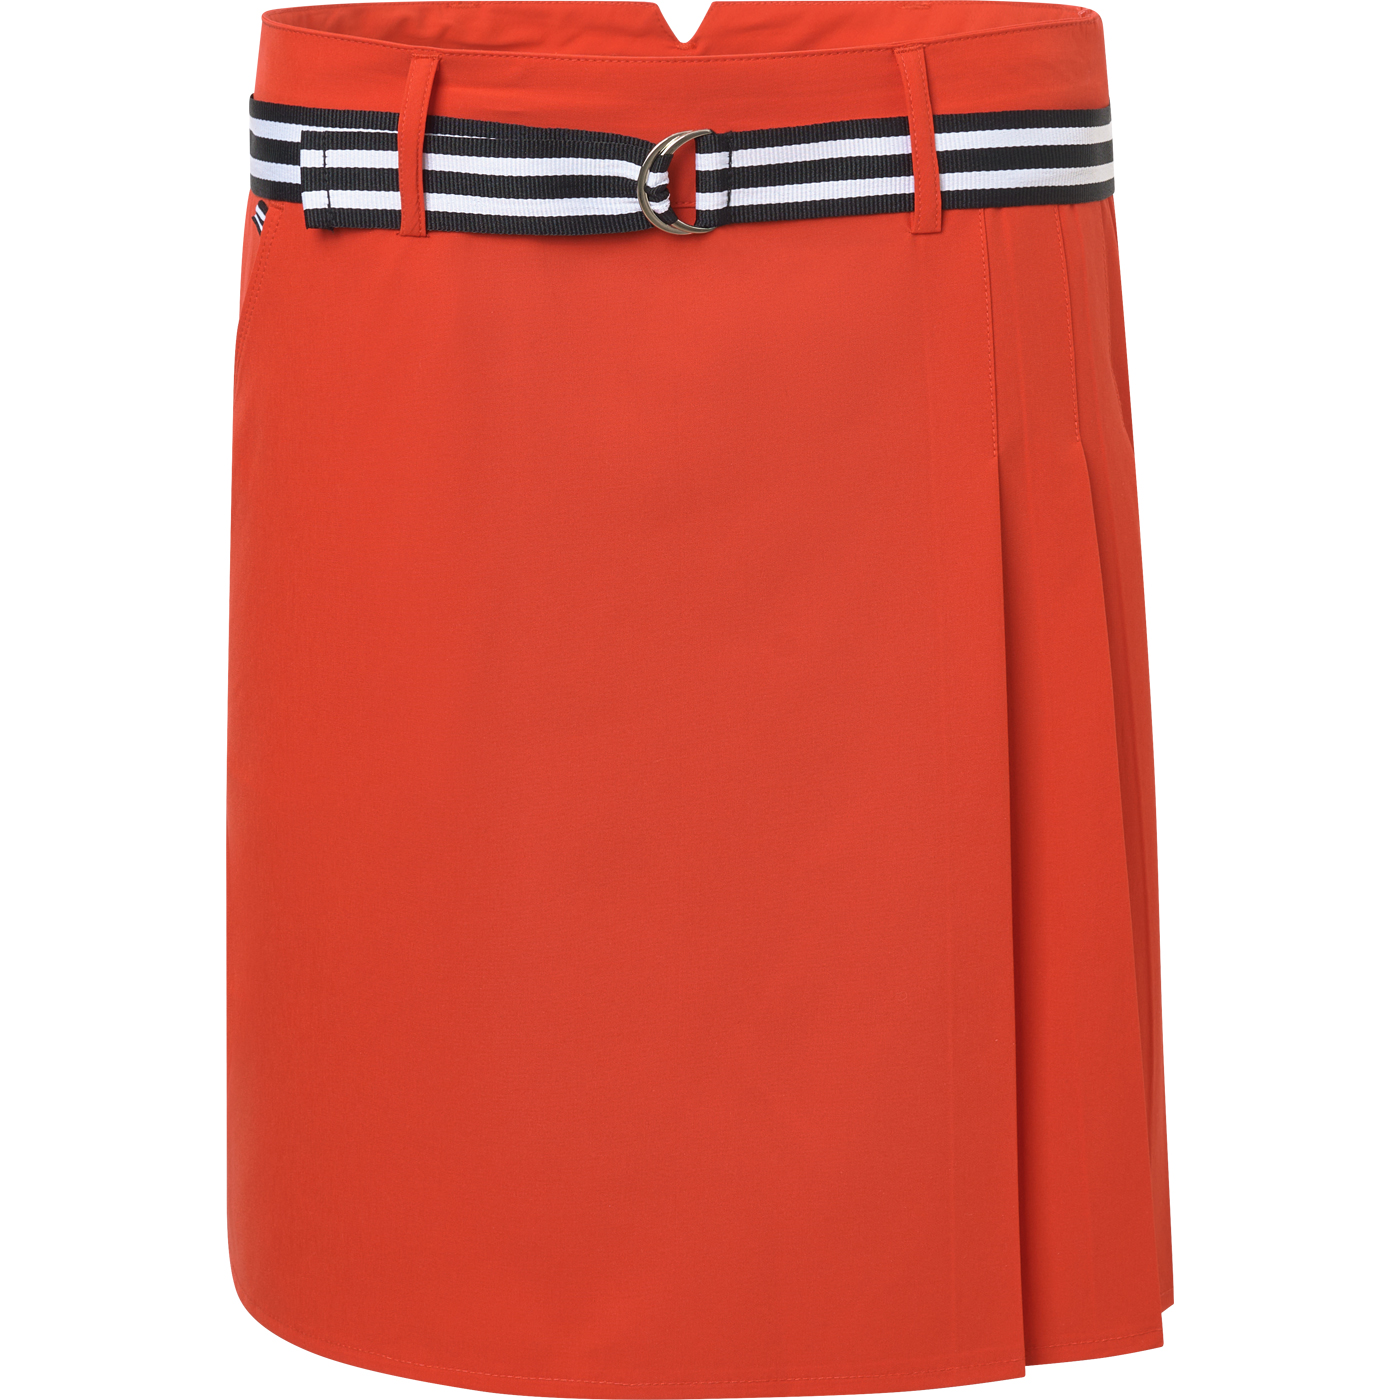 Lds Kildare skort 50cm - poppy red in the group WOMEN / All clothing at Abacus Sportswear (2976416)